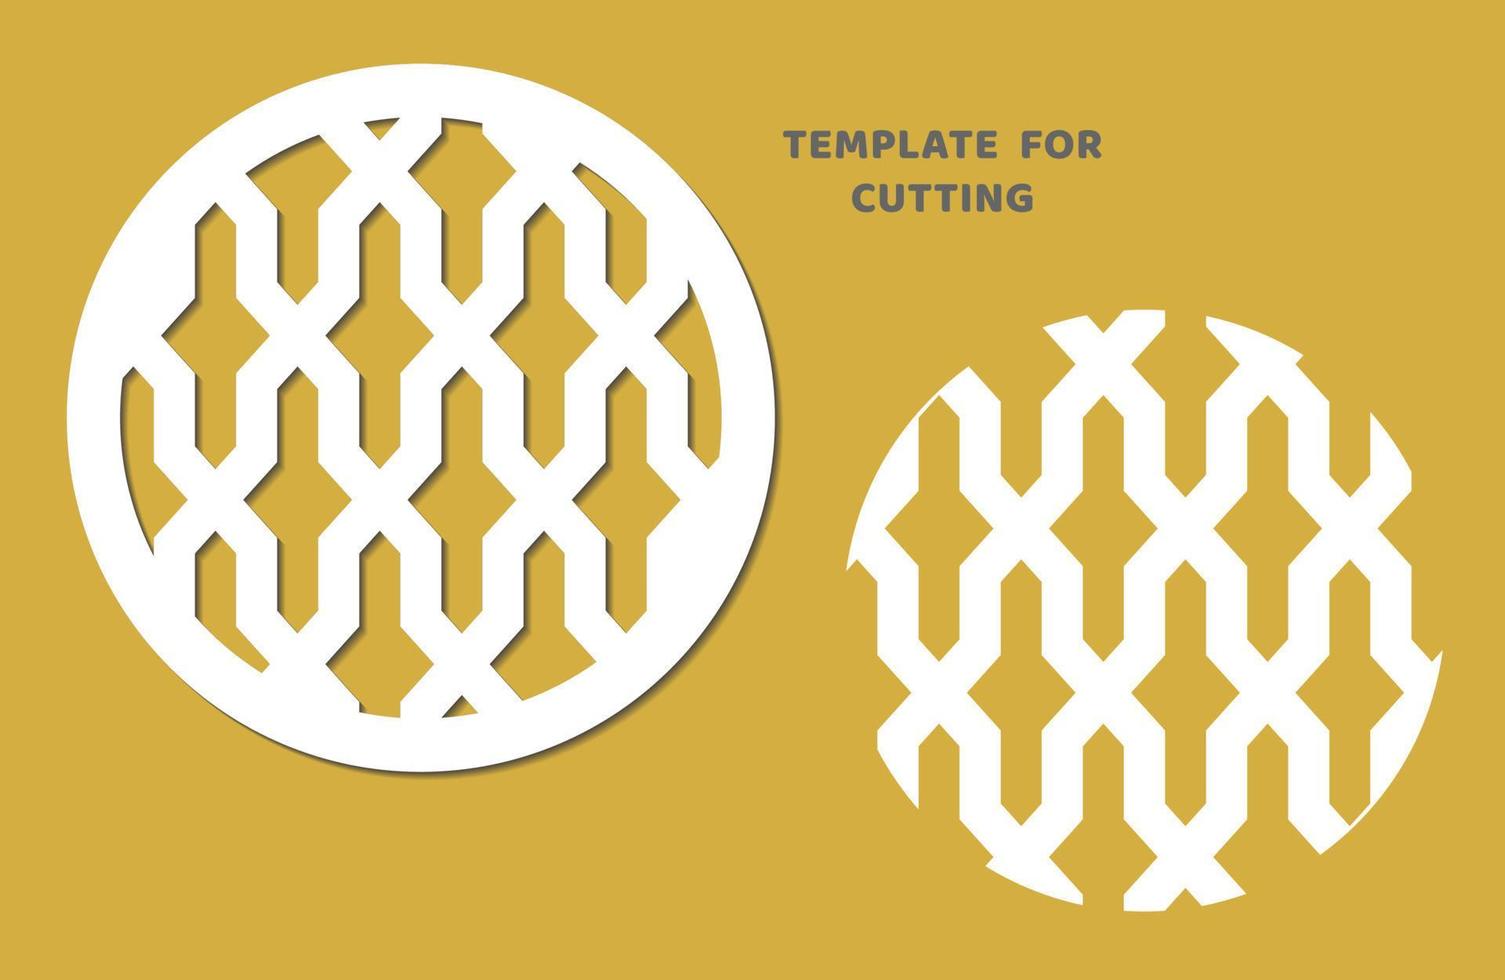 Template for laser cutting, wood carving, paper cut. Circle pattern for cutting. Decorative panel vector stencil.